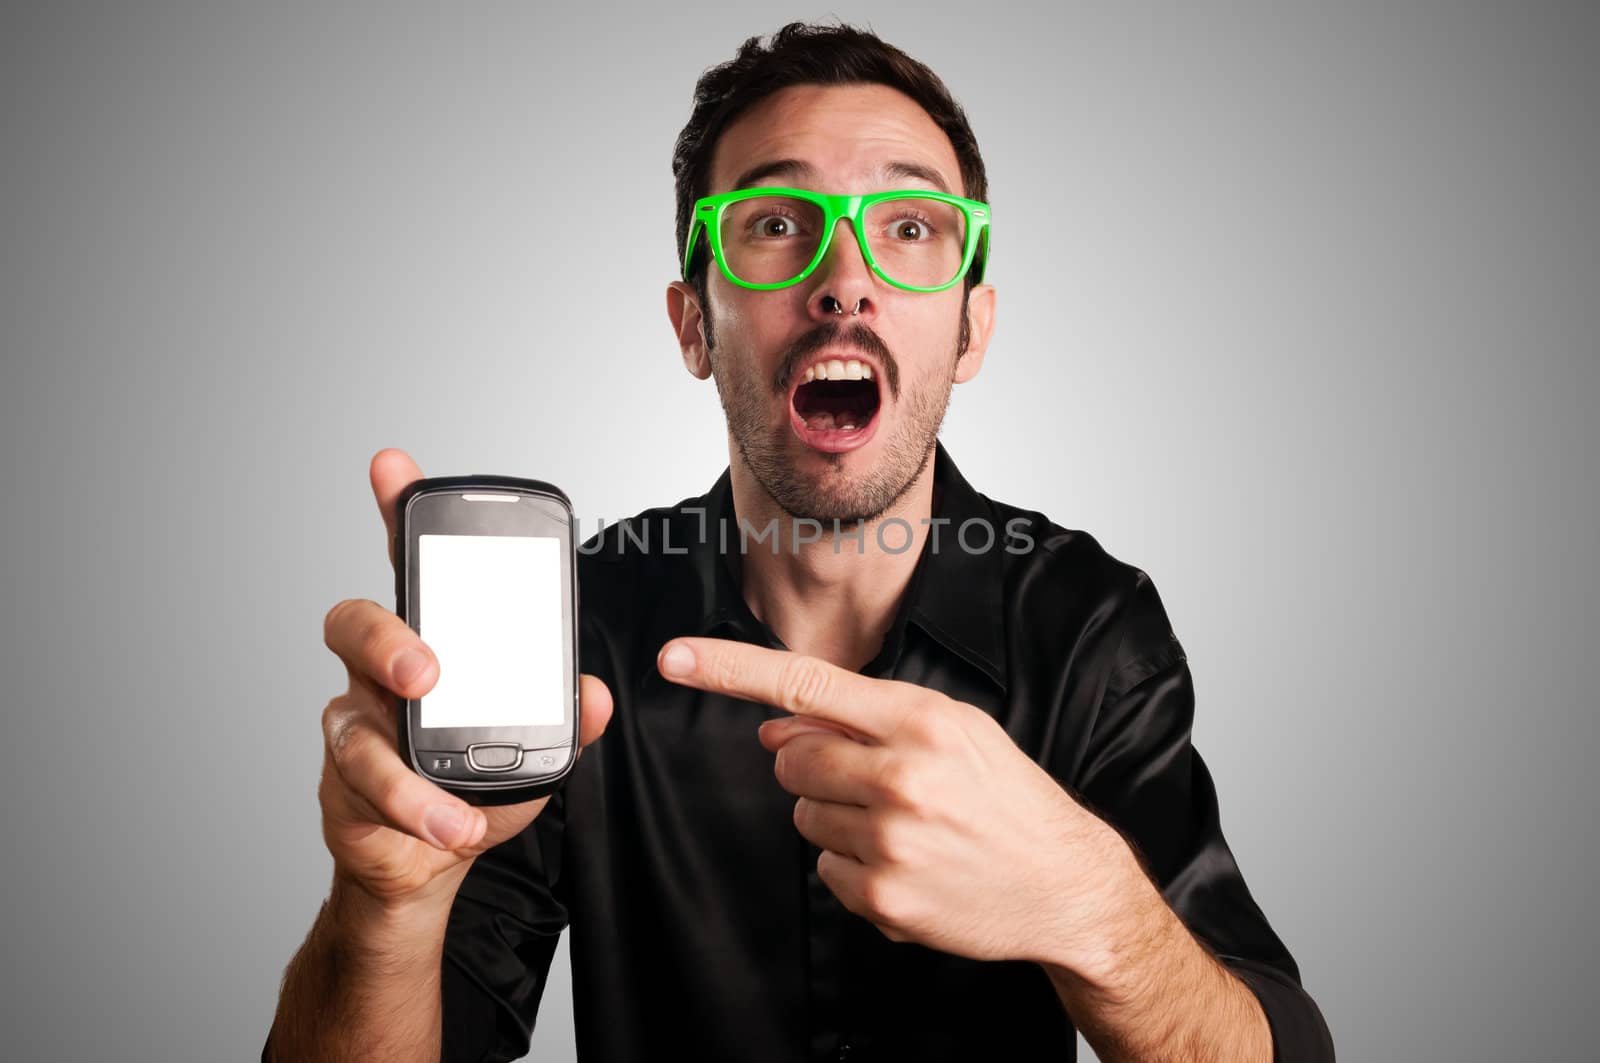 funny man showing phone on gray background